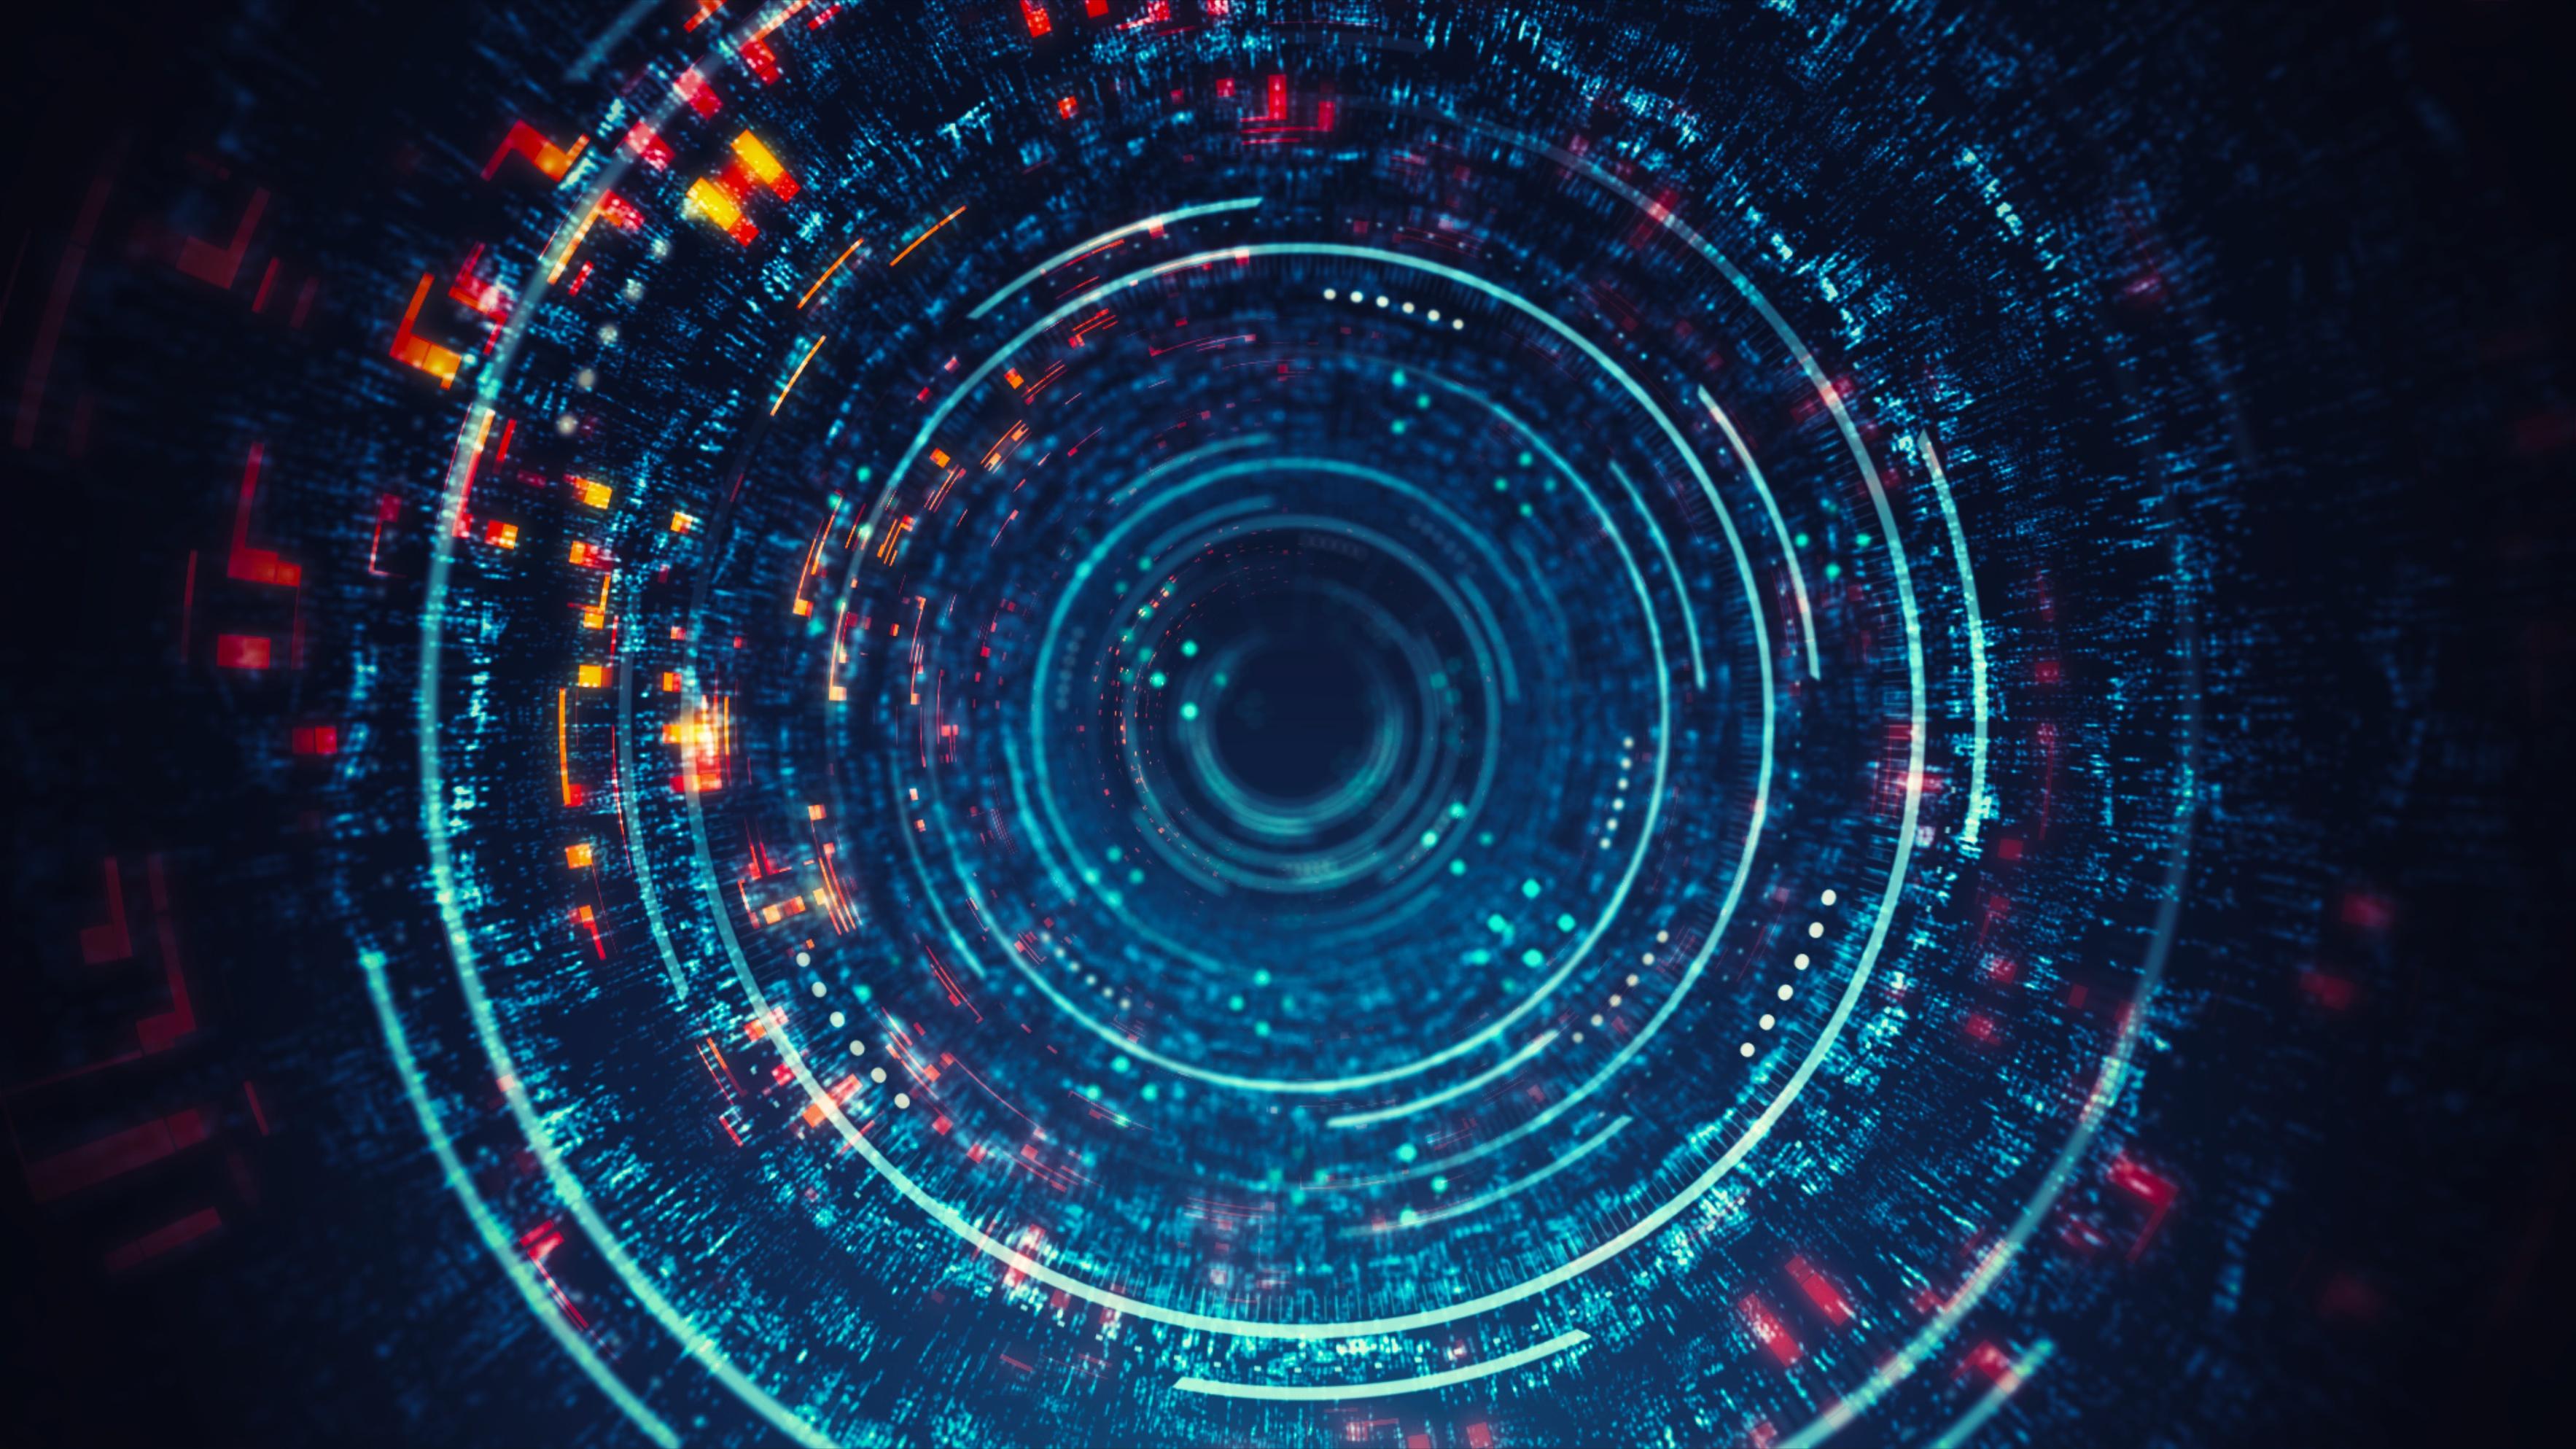 Abstract image of a digital tunnel with glowing lights and binary code, representing the proactive backup monitoring and management services offered by Fast Fixx to ensure data protection and address any issues